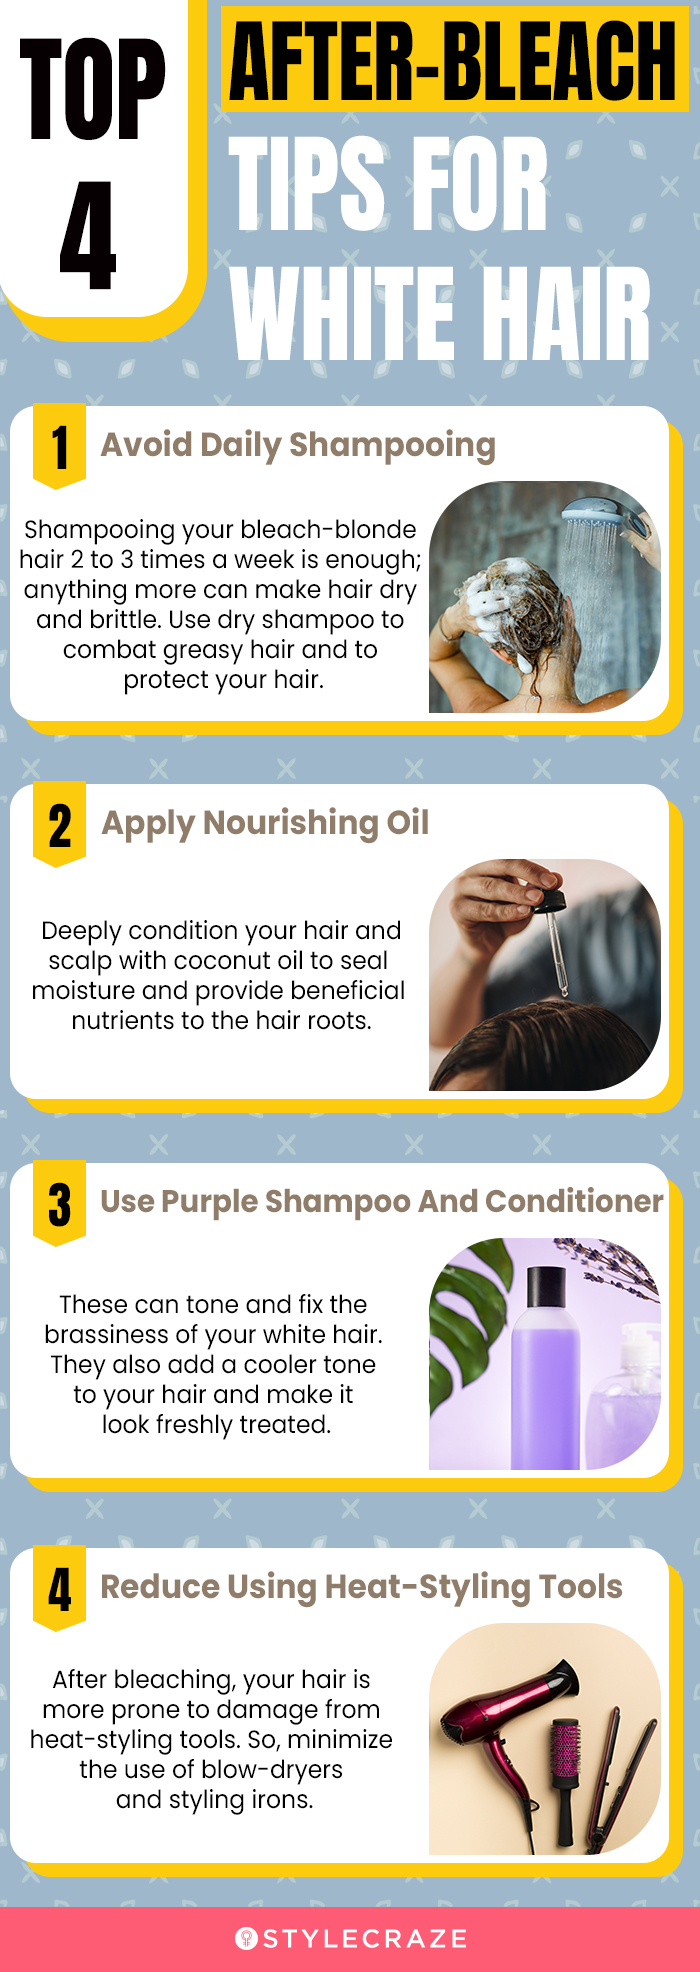 top 4 after bleach tips for white hair (infographic)